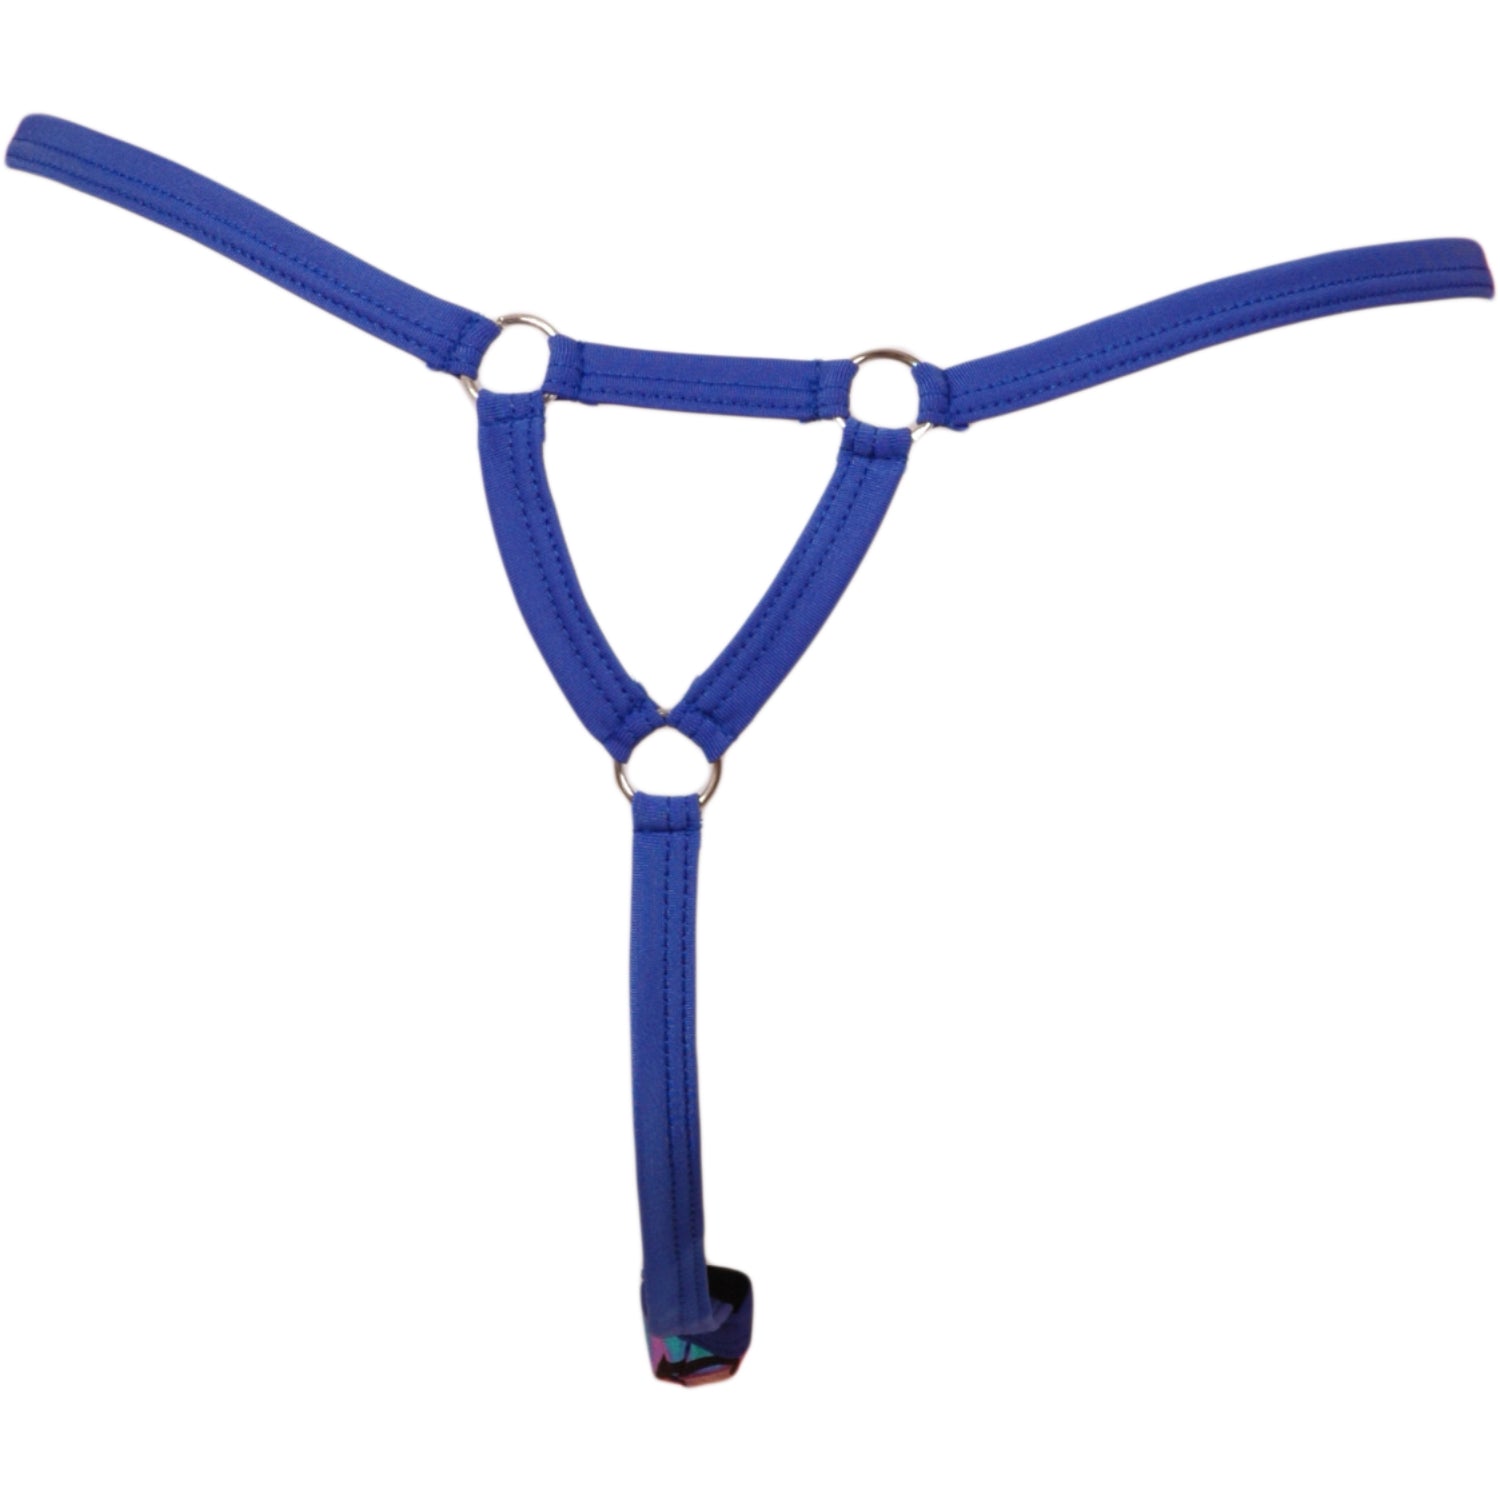 Scale Lame Pouch Triangle Cut Out O-Ring Accent Thong – LingerRave